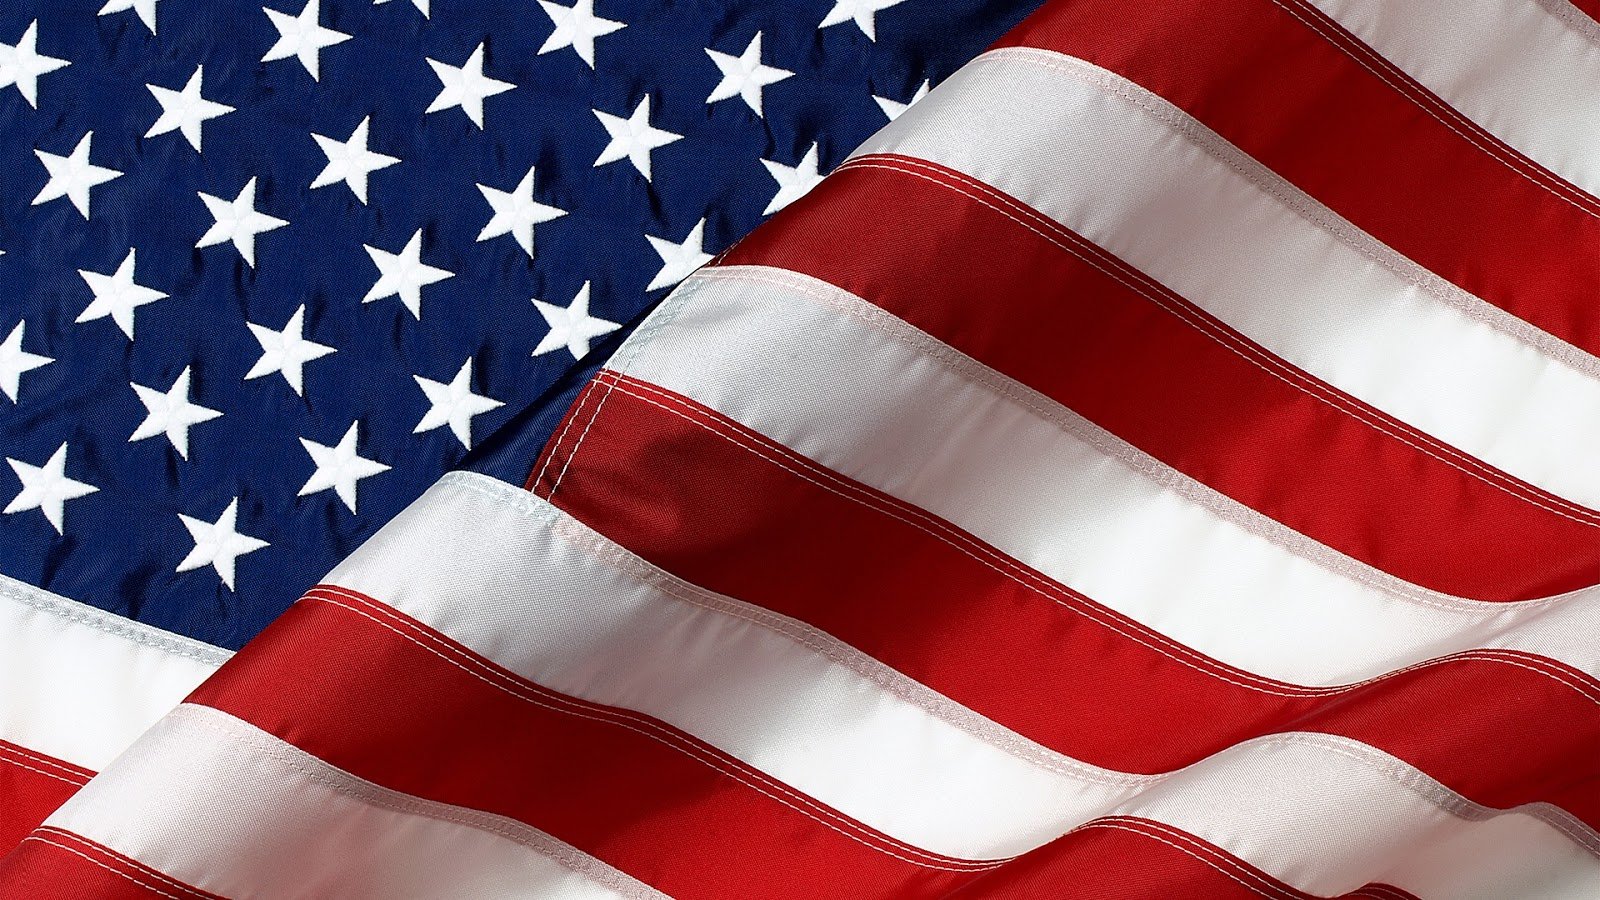  american flag hd wallpaper old american flag with black background 1600x900